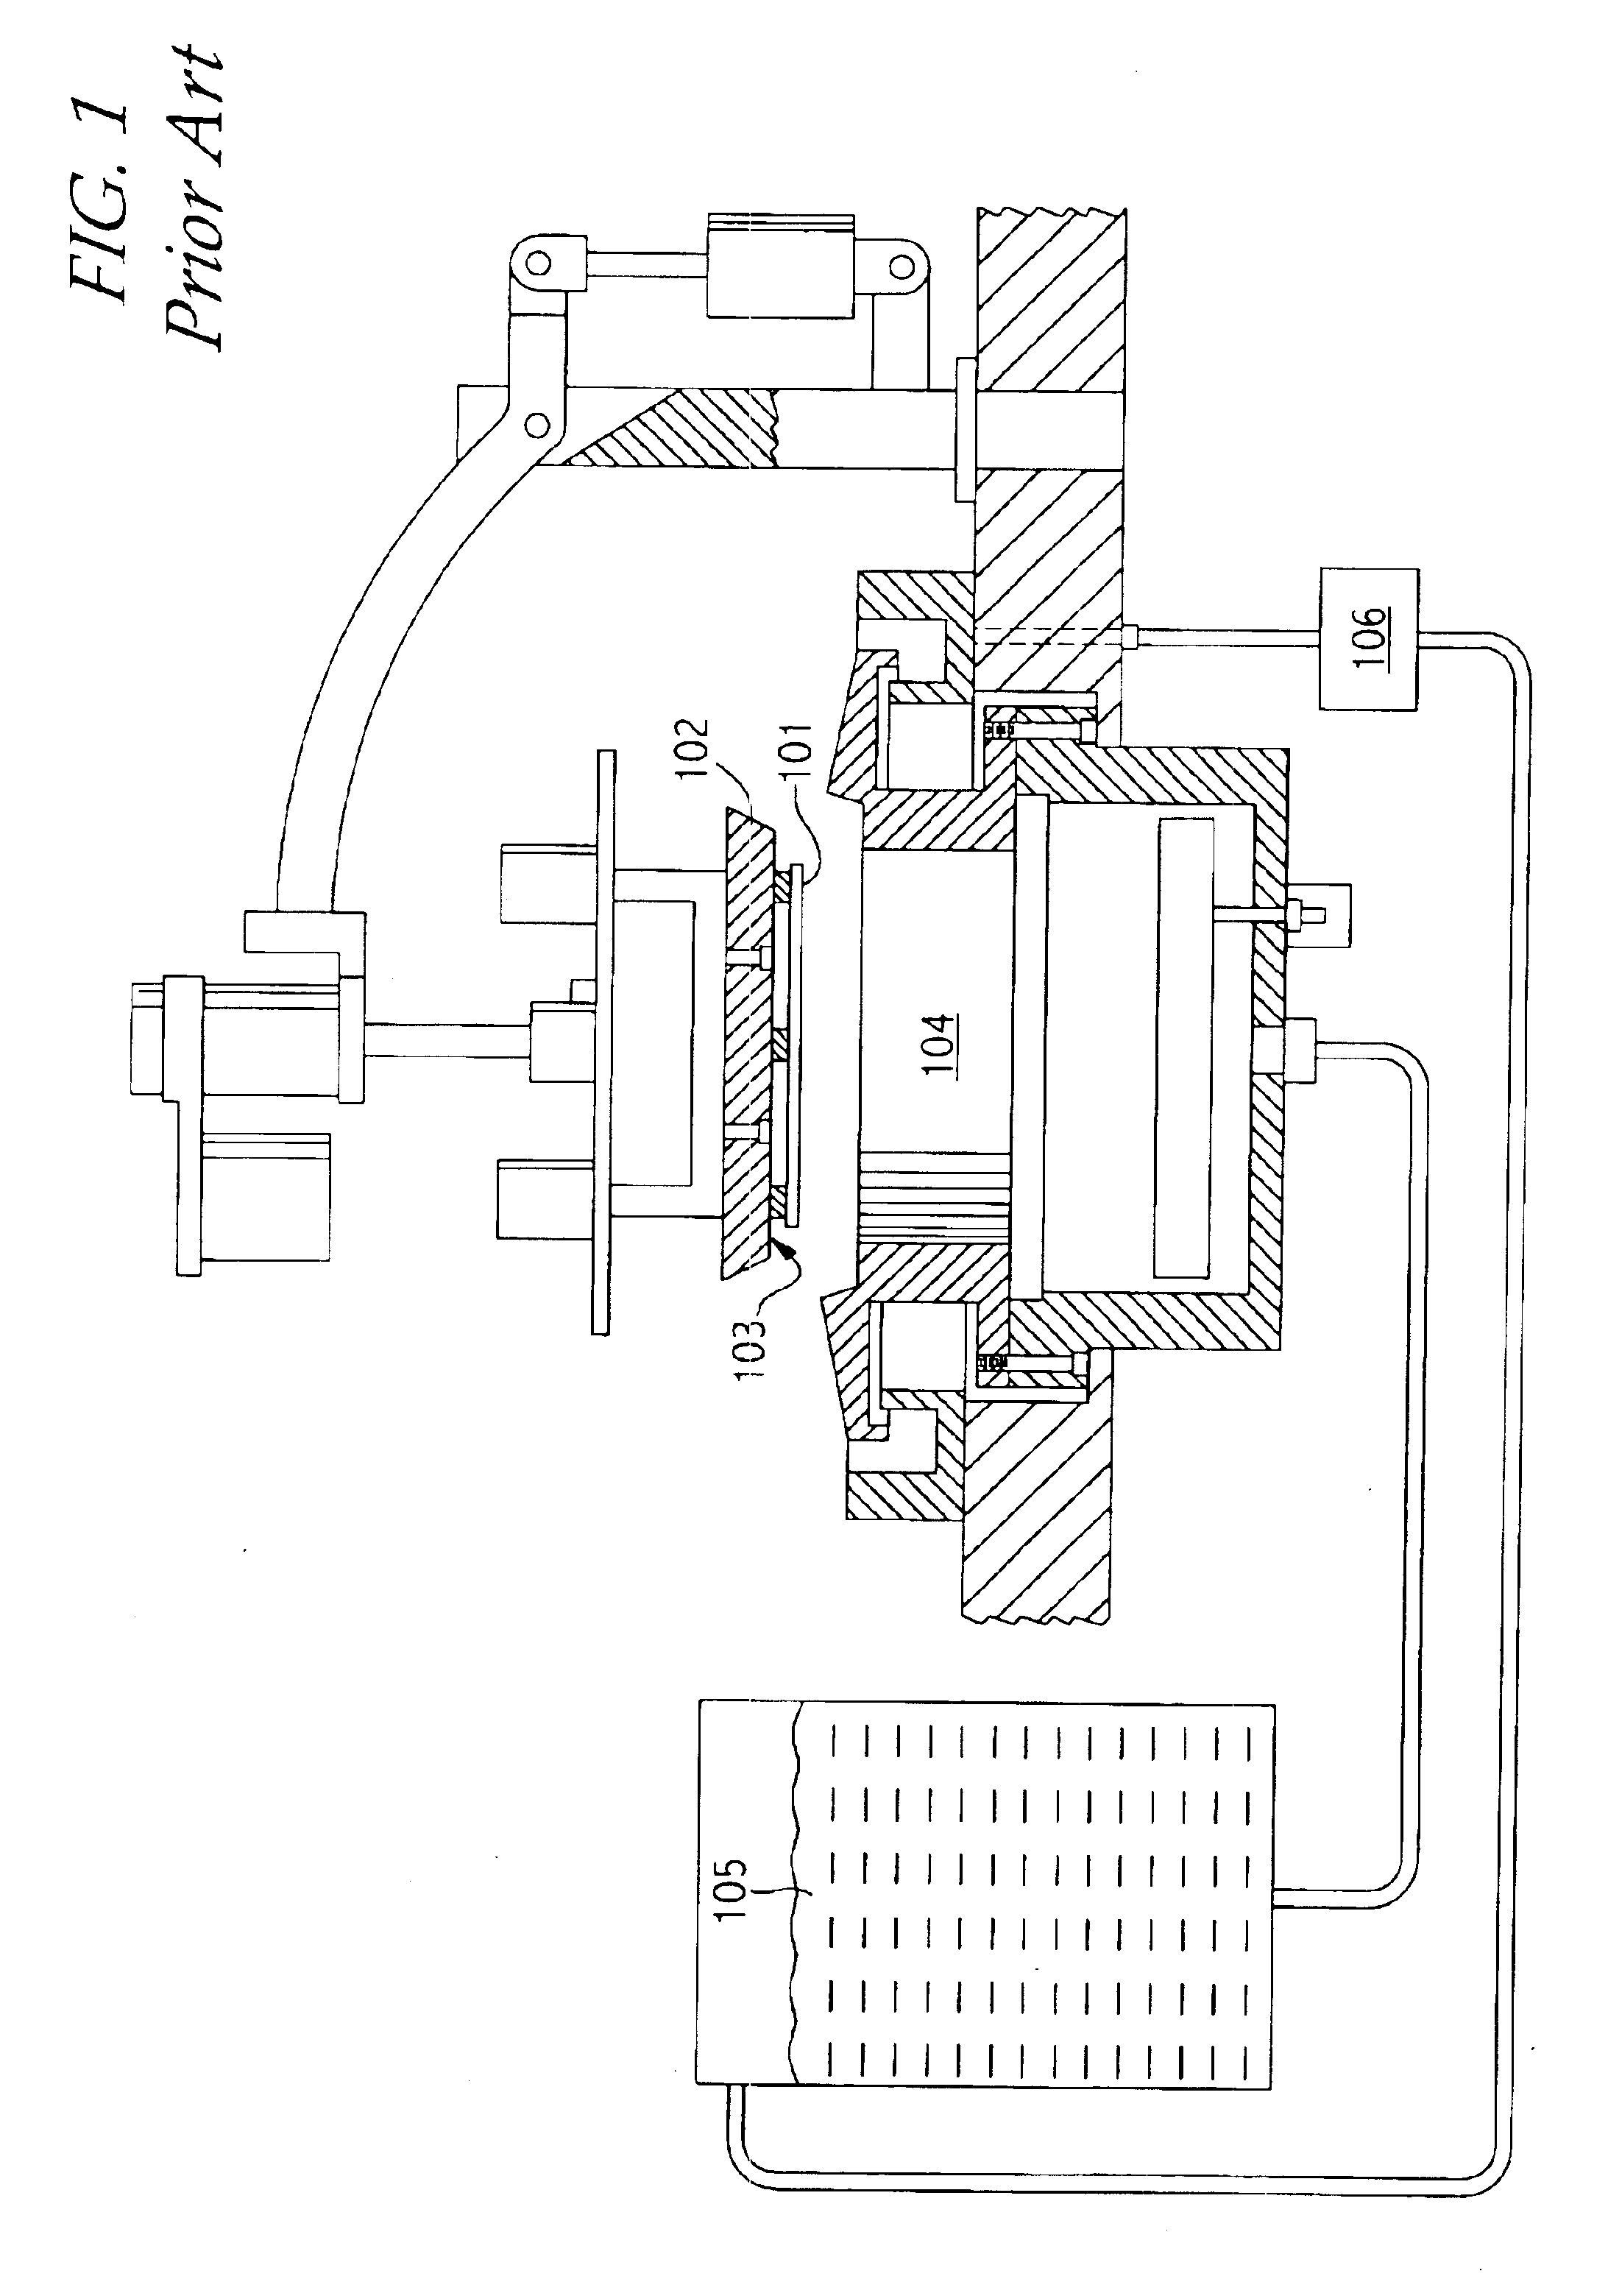 Method and apparatus for reducing organic depletion during non-processing time periods